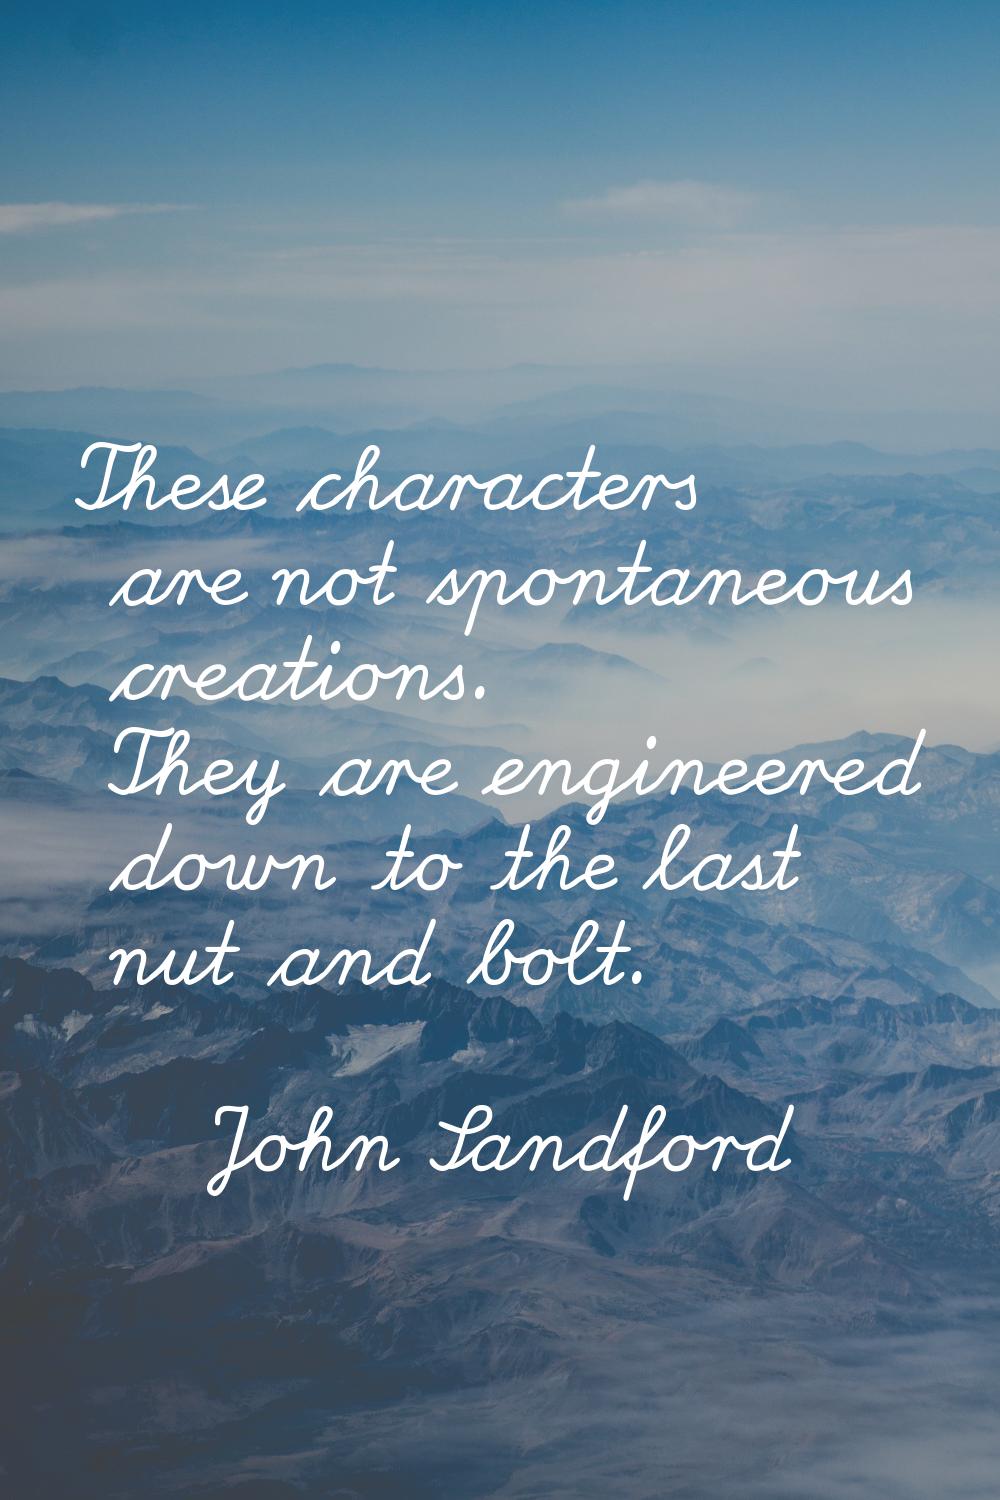 These characters are not spontaneous creations. They are engineered down to the last nut and bolt.